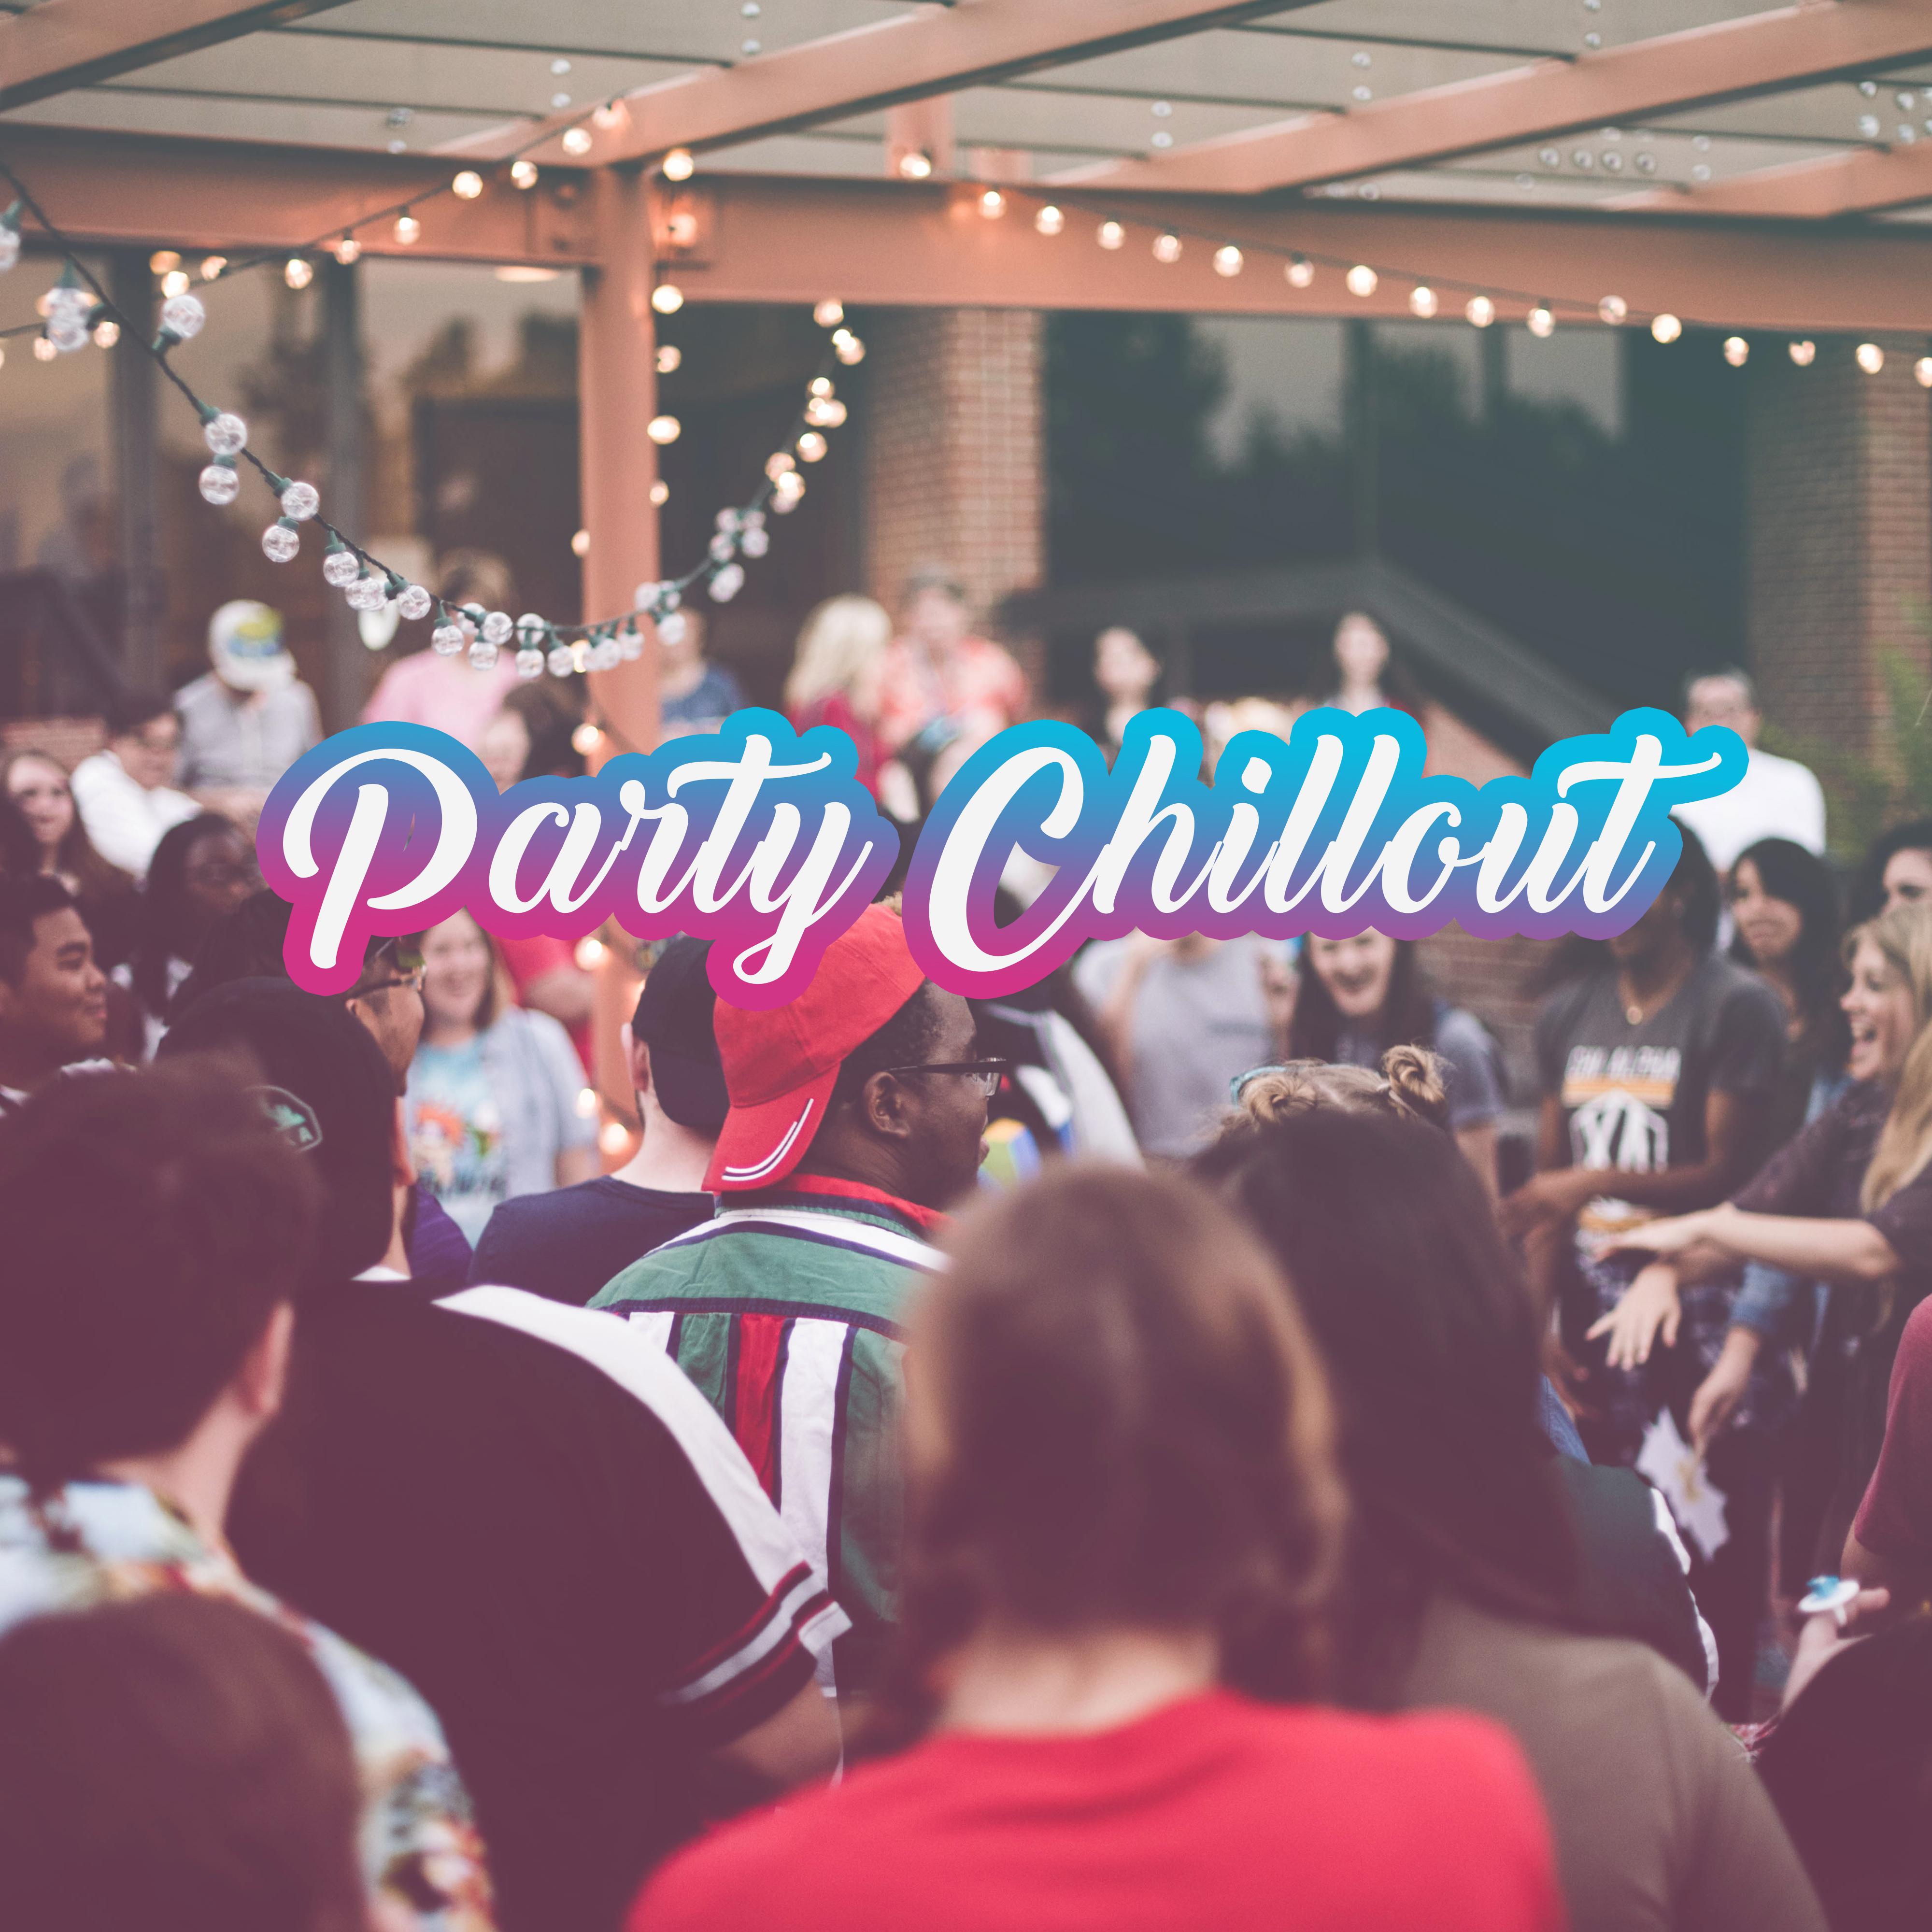 Party Chillout  Relaxing Vibes to Relax, Unwind and Calm Down at the Party